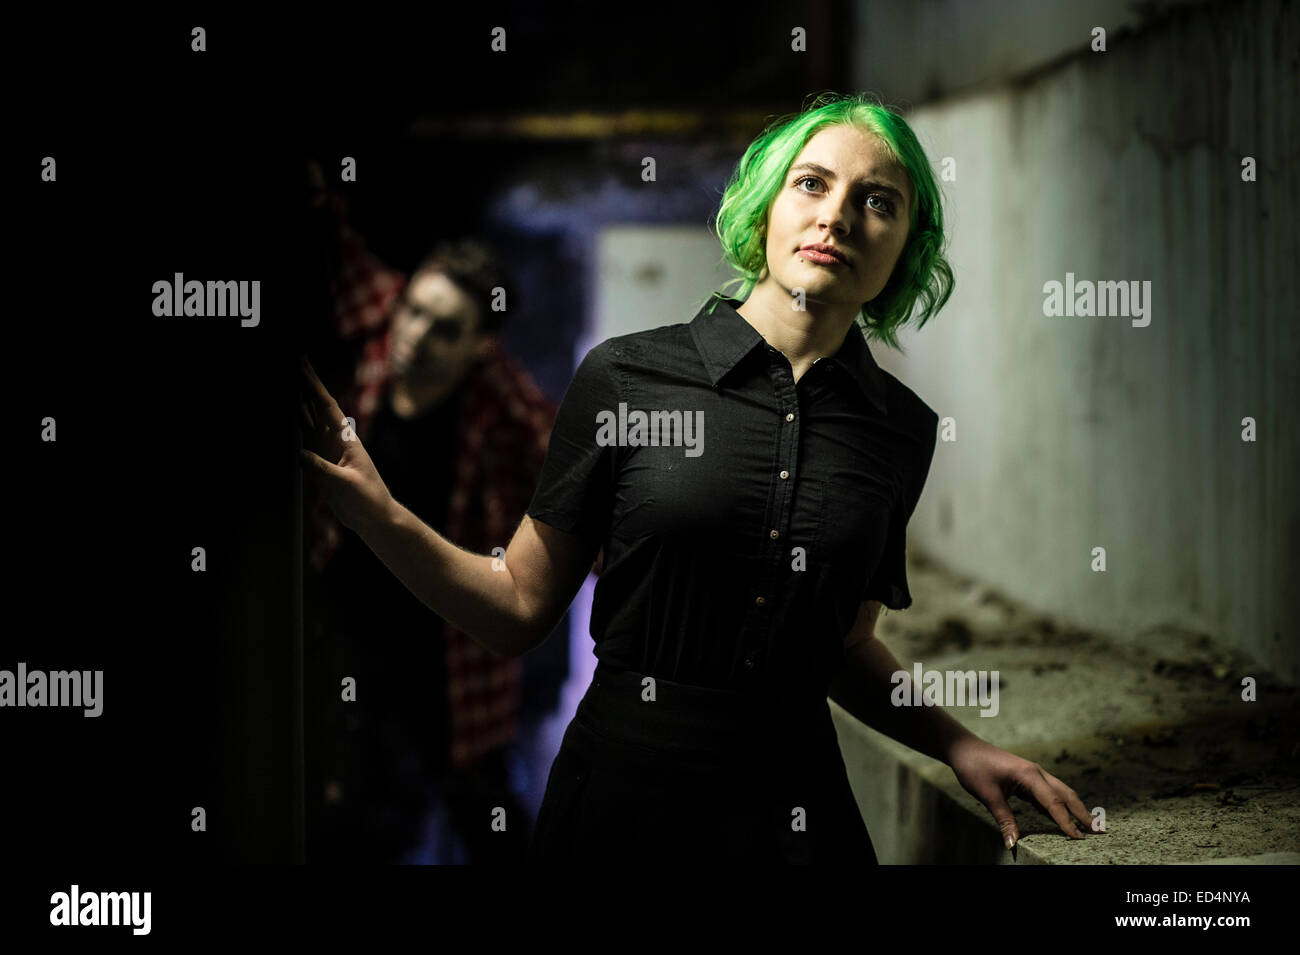 Fantasy photoshoot: makeup and theatre design students role playing a 'murder mystery' stalking movie scene - a young green haired woman girl being stalked followed in a dark alley at night UK Stock Photo